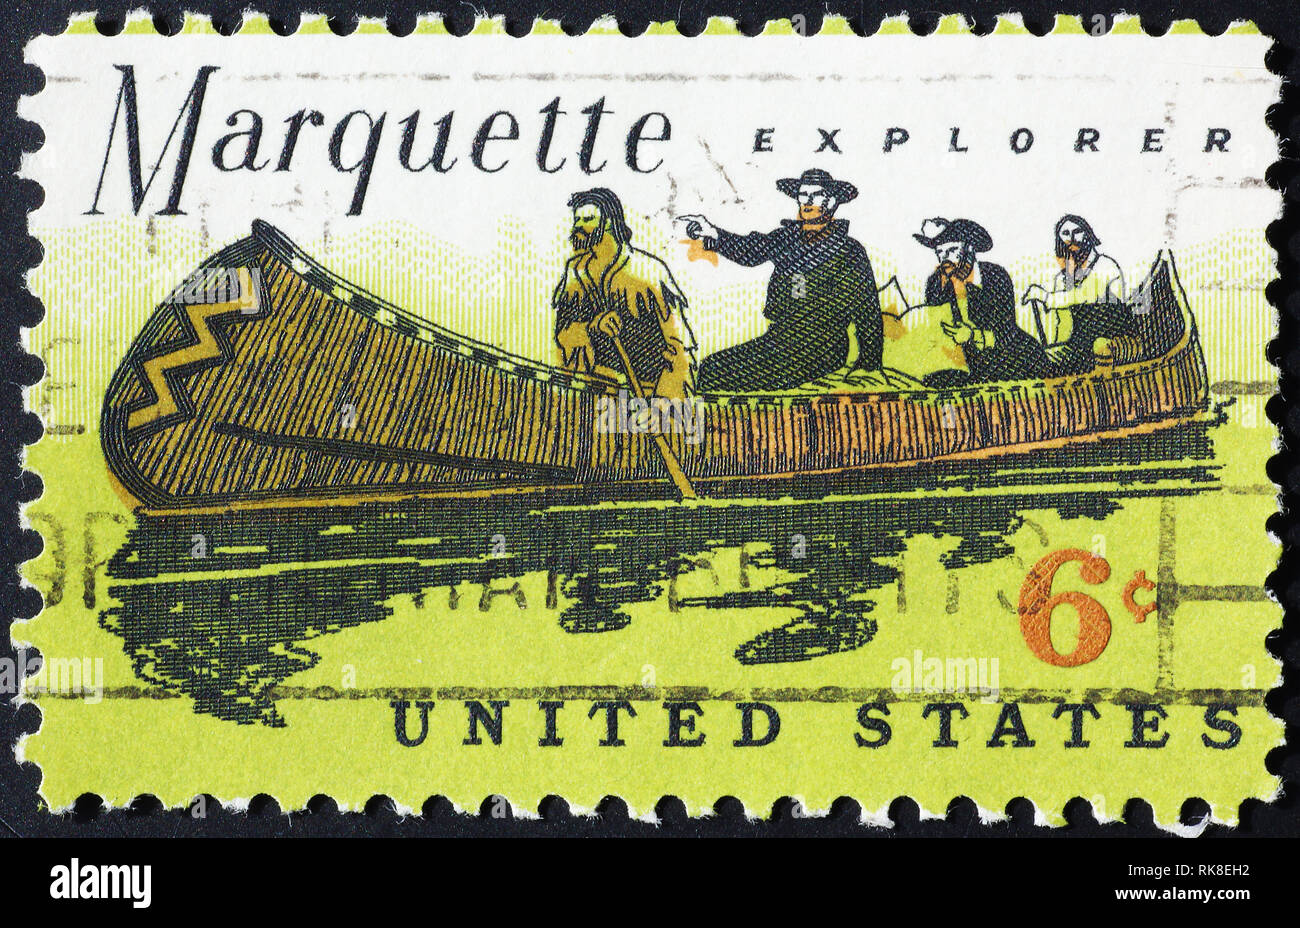 Celebration of Marquette explorer on american postage stamp Stock Photo